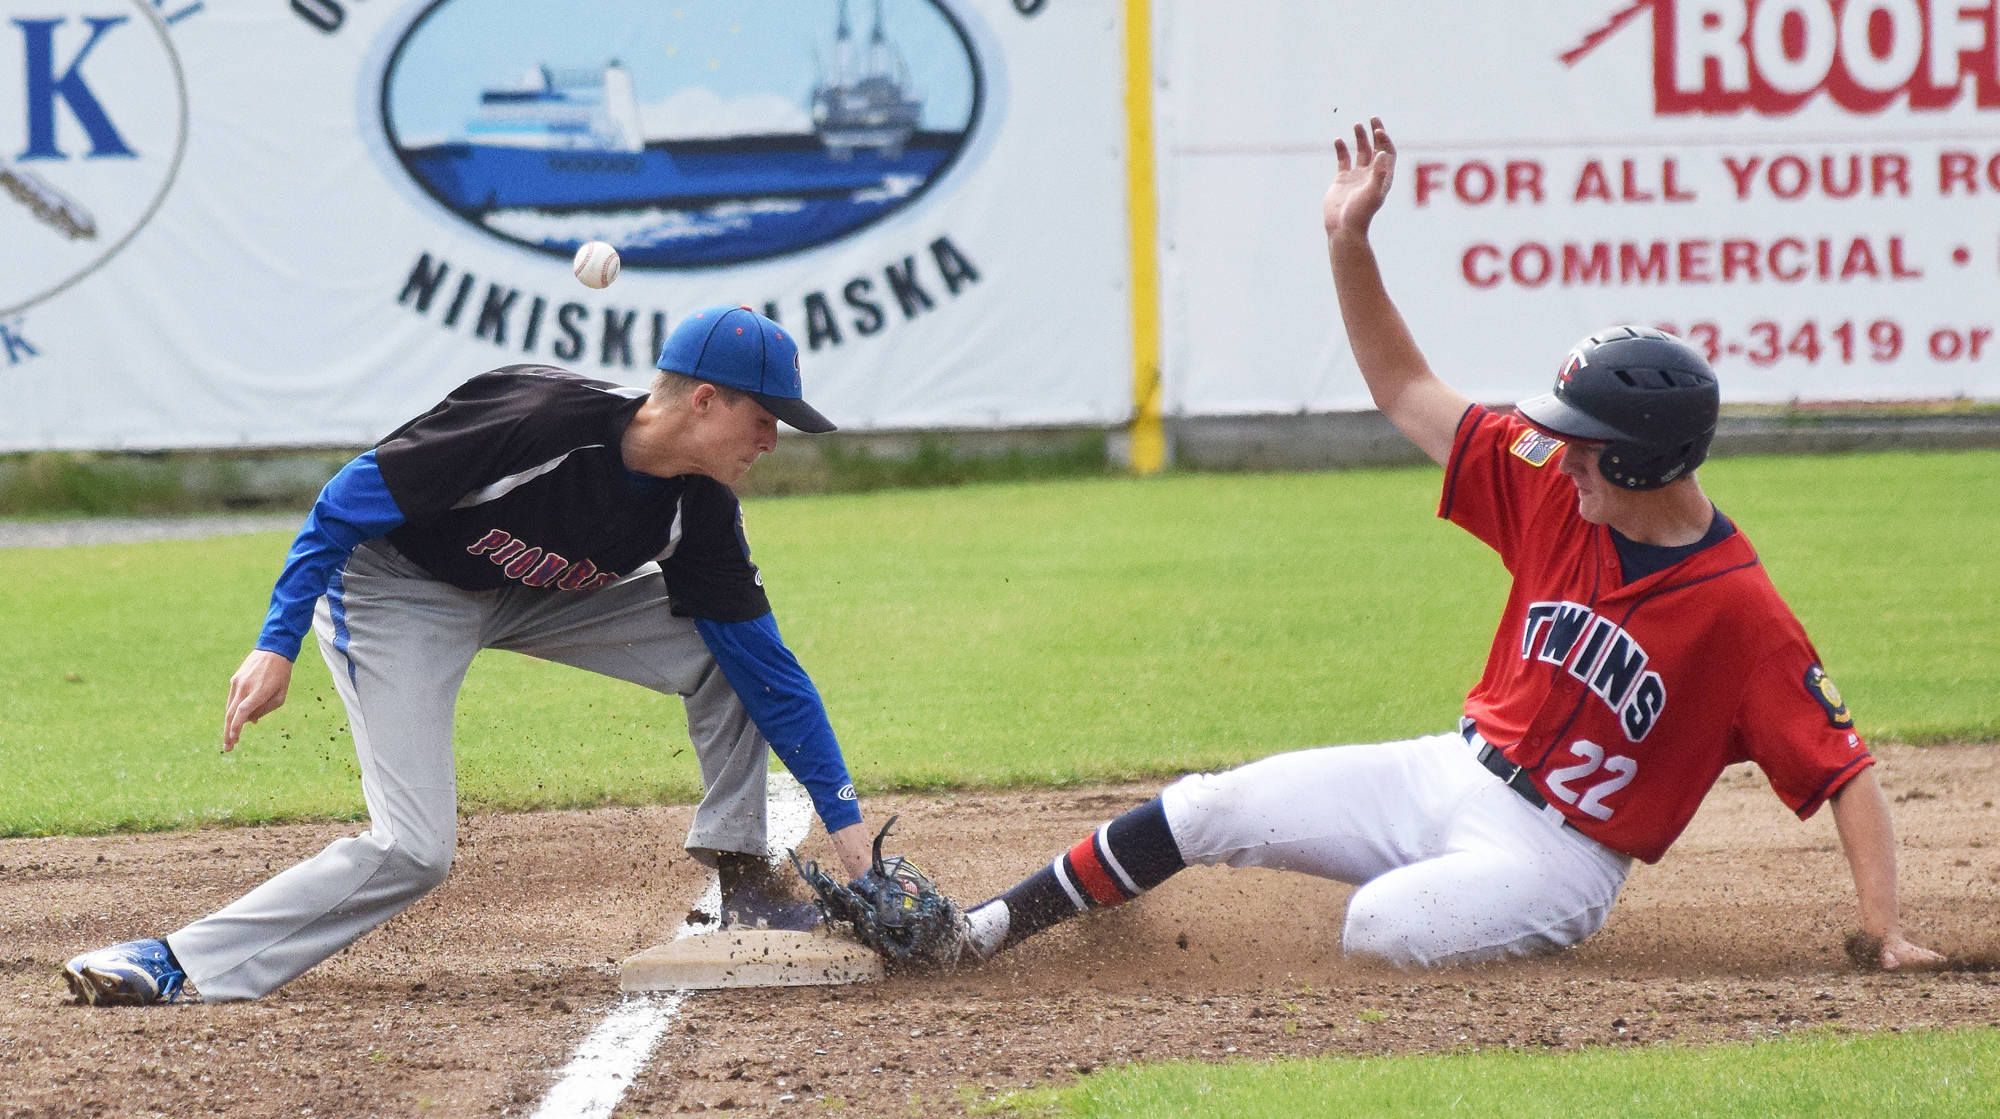 The Post 20 Twins’ Cody Quelland slides into third base ahead of the botched tag by Palmer’s Alasada McKechnie, Sunday at Coral Seymour Memorial Ballpark in Kenai. (Photo by Joey Klecka/Peninsula Clarion)